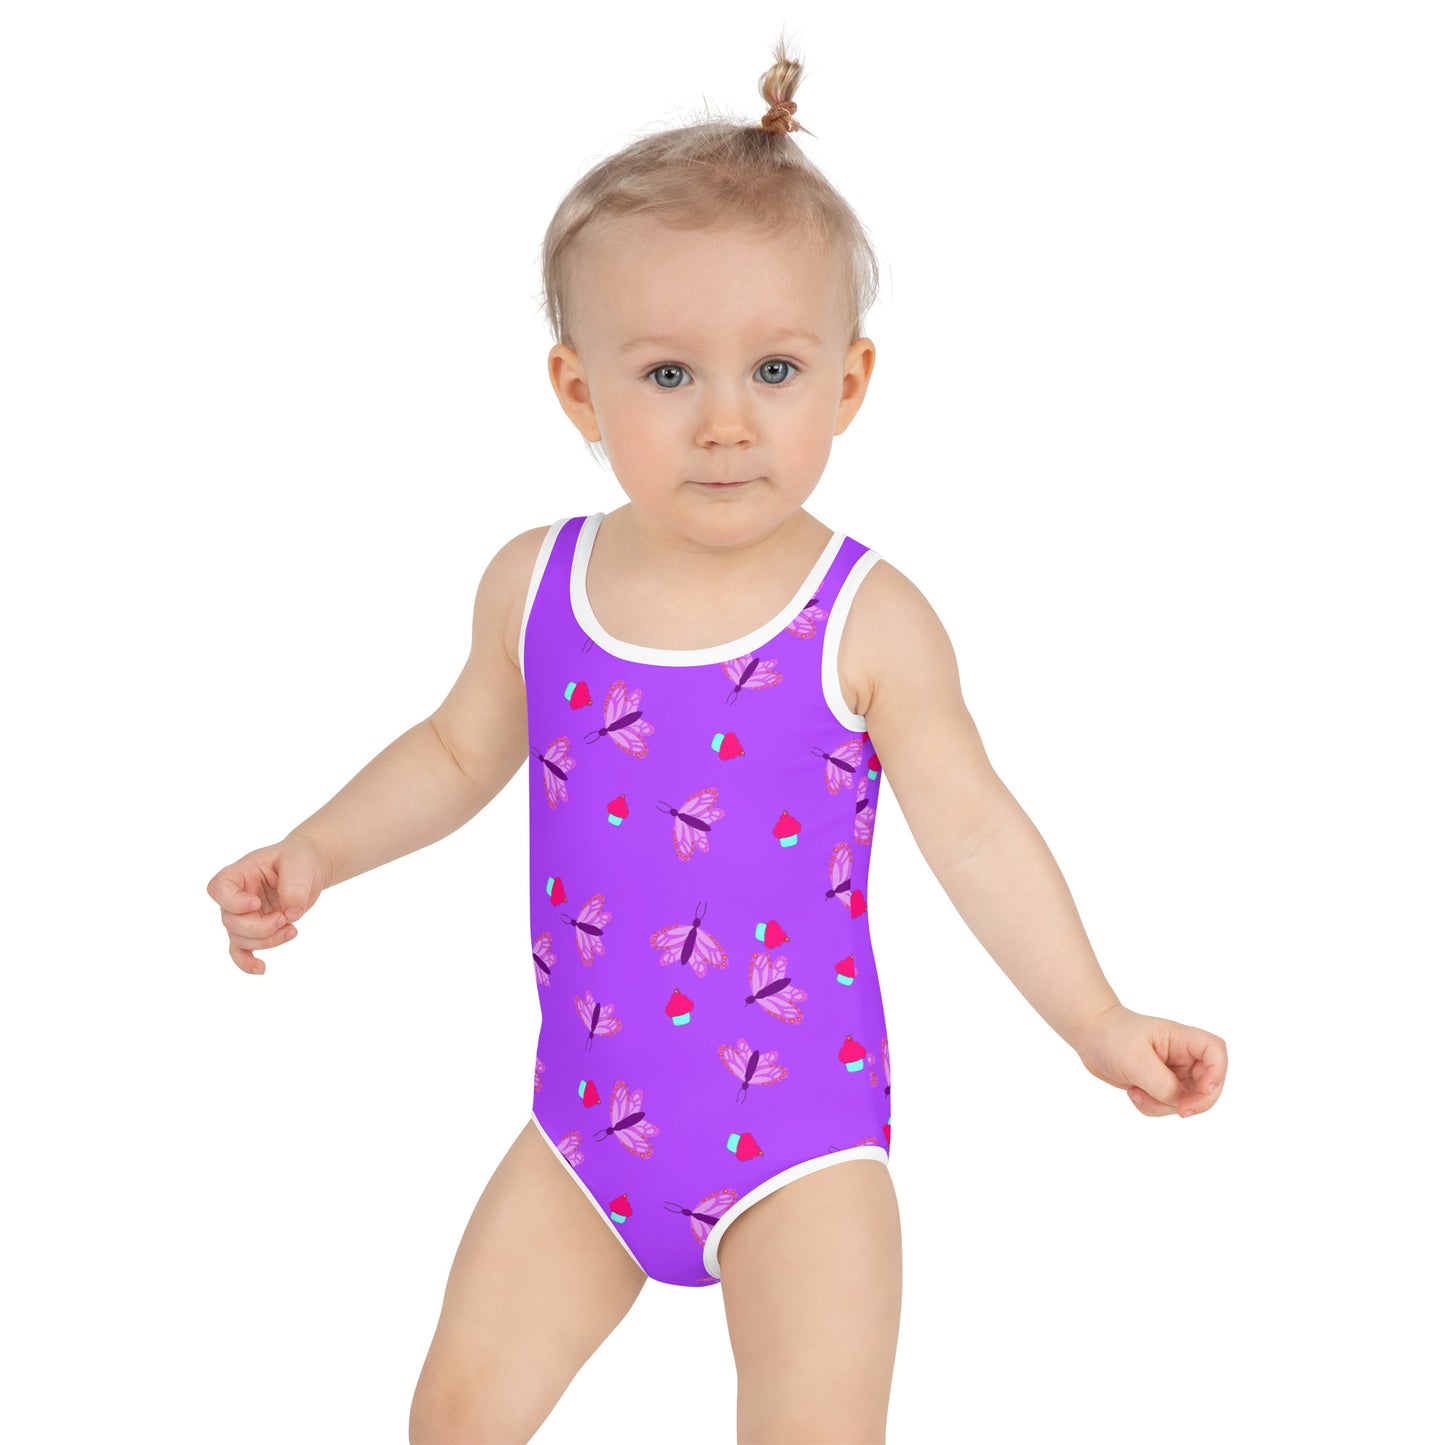 Girls' Athletic Swimsuit One Piece Purple with Butterflies and Cupcakes (Size 2T-7) FREE SHIPPING